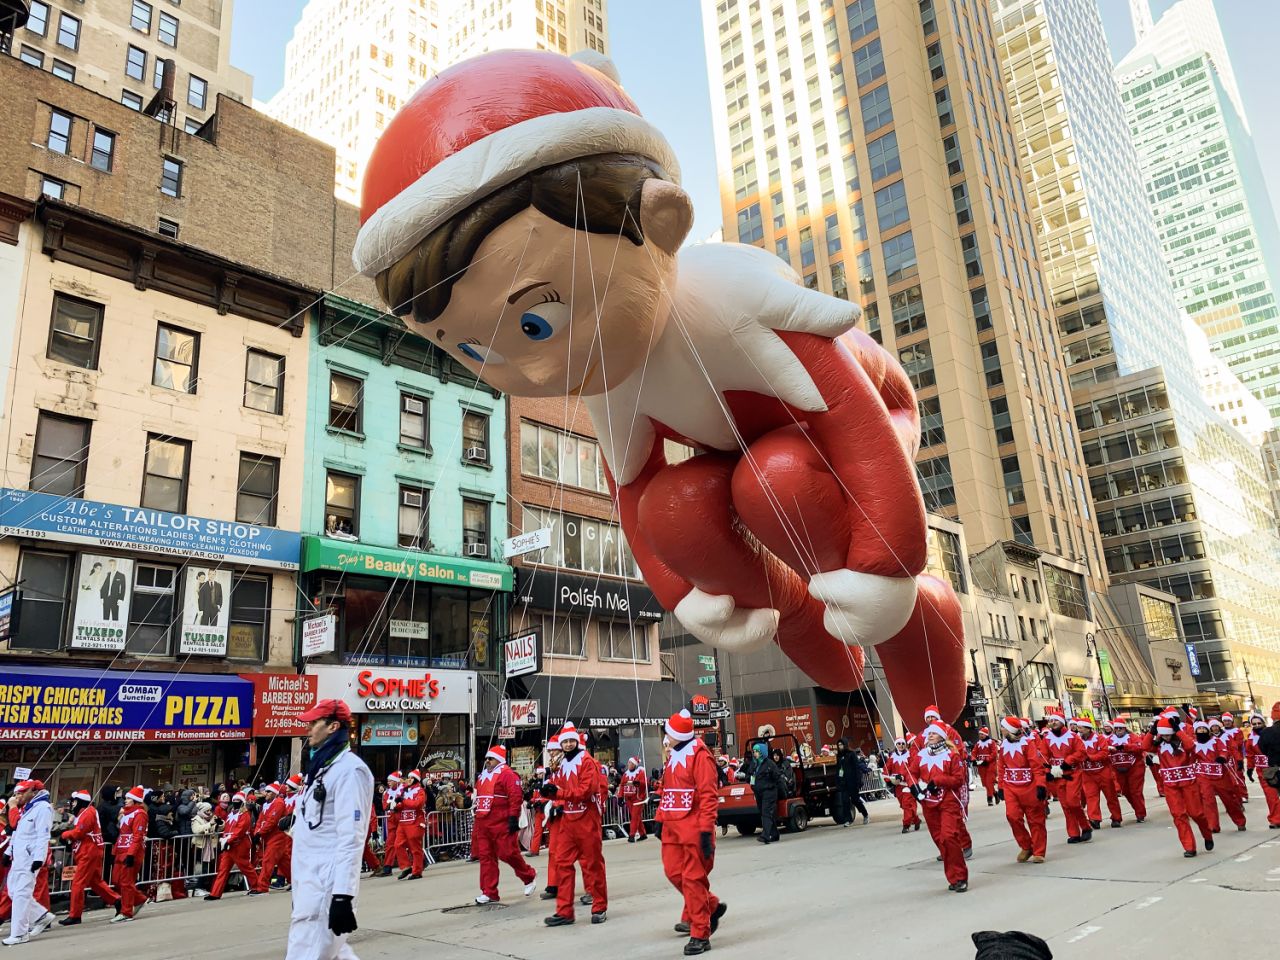 Inside the Macy’s Thanksgiving Day Parade: ‘I’m a balloon handler’